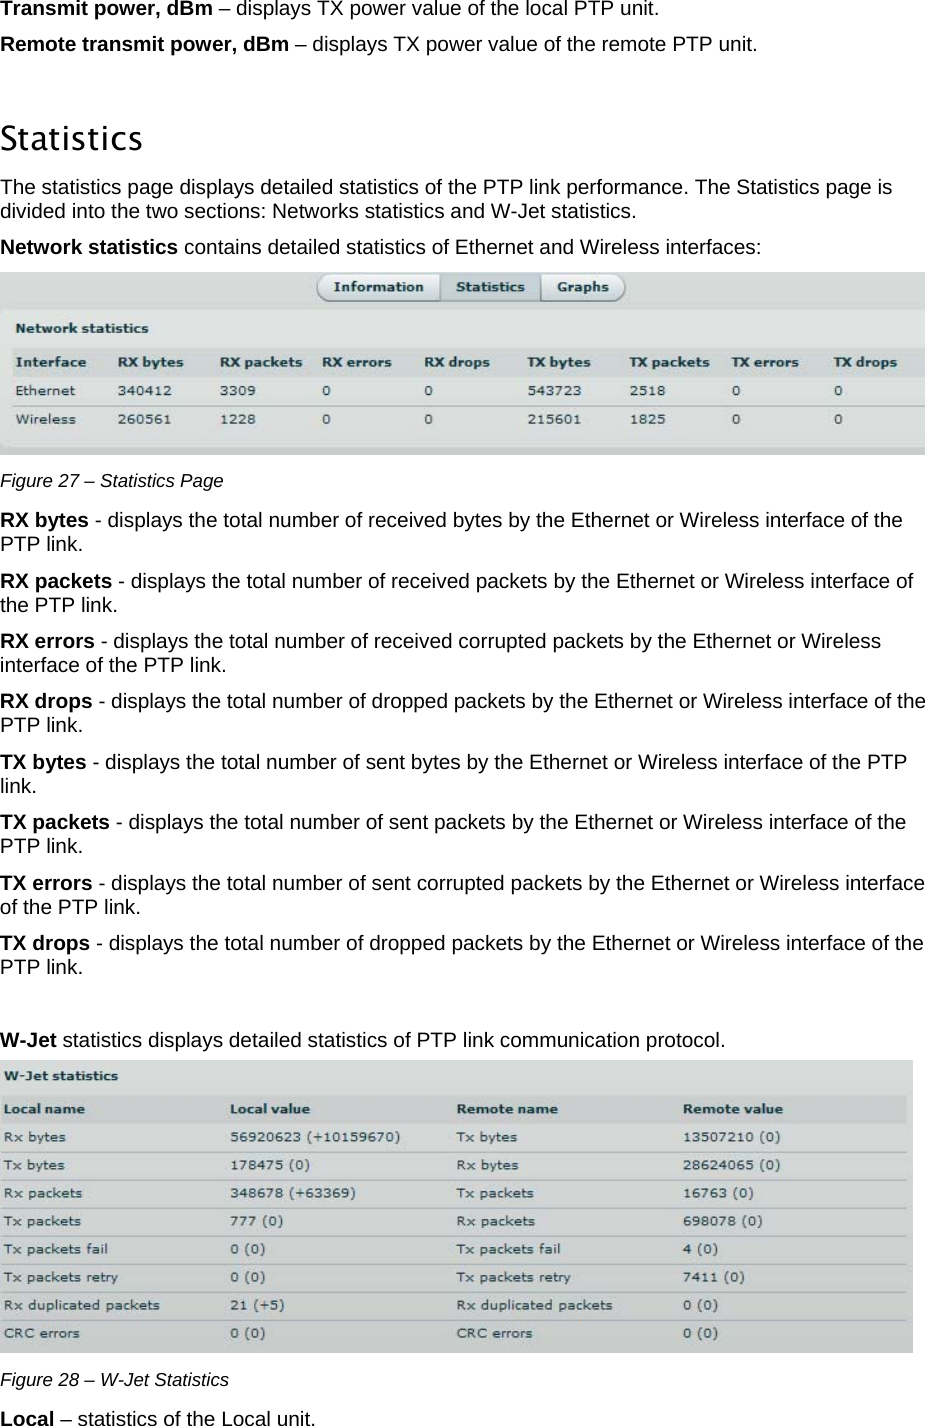  LigoWave Page 25 Transmit power, dBm – displays TX power value of the local PTP unit.  Remote transmit power, dBm – displays TX power value of the remote PTP unit.   Statistics The statistics page displays detailed statistics of the PTP link performance. The Statistics page is divided into the two sections: Networks statistics and W-Jet statistics.  Network statistics contains detailed statistics of Ethernet and Wireless interfaces:   Figure 27 – Statistics Page RX bytes - displays the total number of received bytes by the Ethernet or Wireless interface of the PTP link.  RX packets - displays the total number of received packets by the Ethernet or Wireless interface of the PTP link.  RX errors - displays the total number of received corrupted packets by the Ethernet or Wireless interface of the PTP link.  RX drops - displays the total number of dropped packets by the Ethernet or Wireless interface of the PTP link.  TX bytes - displays the total number of sent bytes by the Ethernet or Wireless interface of the PTP link.  TX packets - displays the total number of sent packets by the Ethernet or Wireless interface of the PTP link.  TX errors - displays the total number of sent corrupted packets by the Ethernet or Wireless interface of the PTP link.  TX drops - displays the total number of dropped packets by the Ethernet or Wireless interface of the PTP link.   W-Jet statistics displays detailed statistics of PTP link communication protocol.   Figure 28 – W-Jet Statistics Local – statistics of the Local unit.  